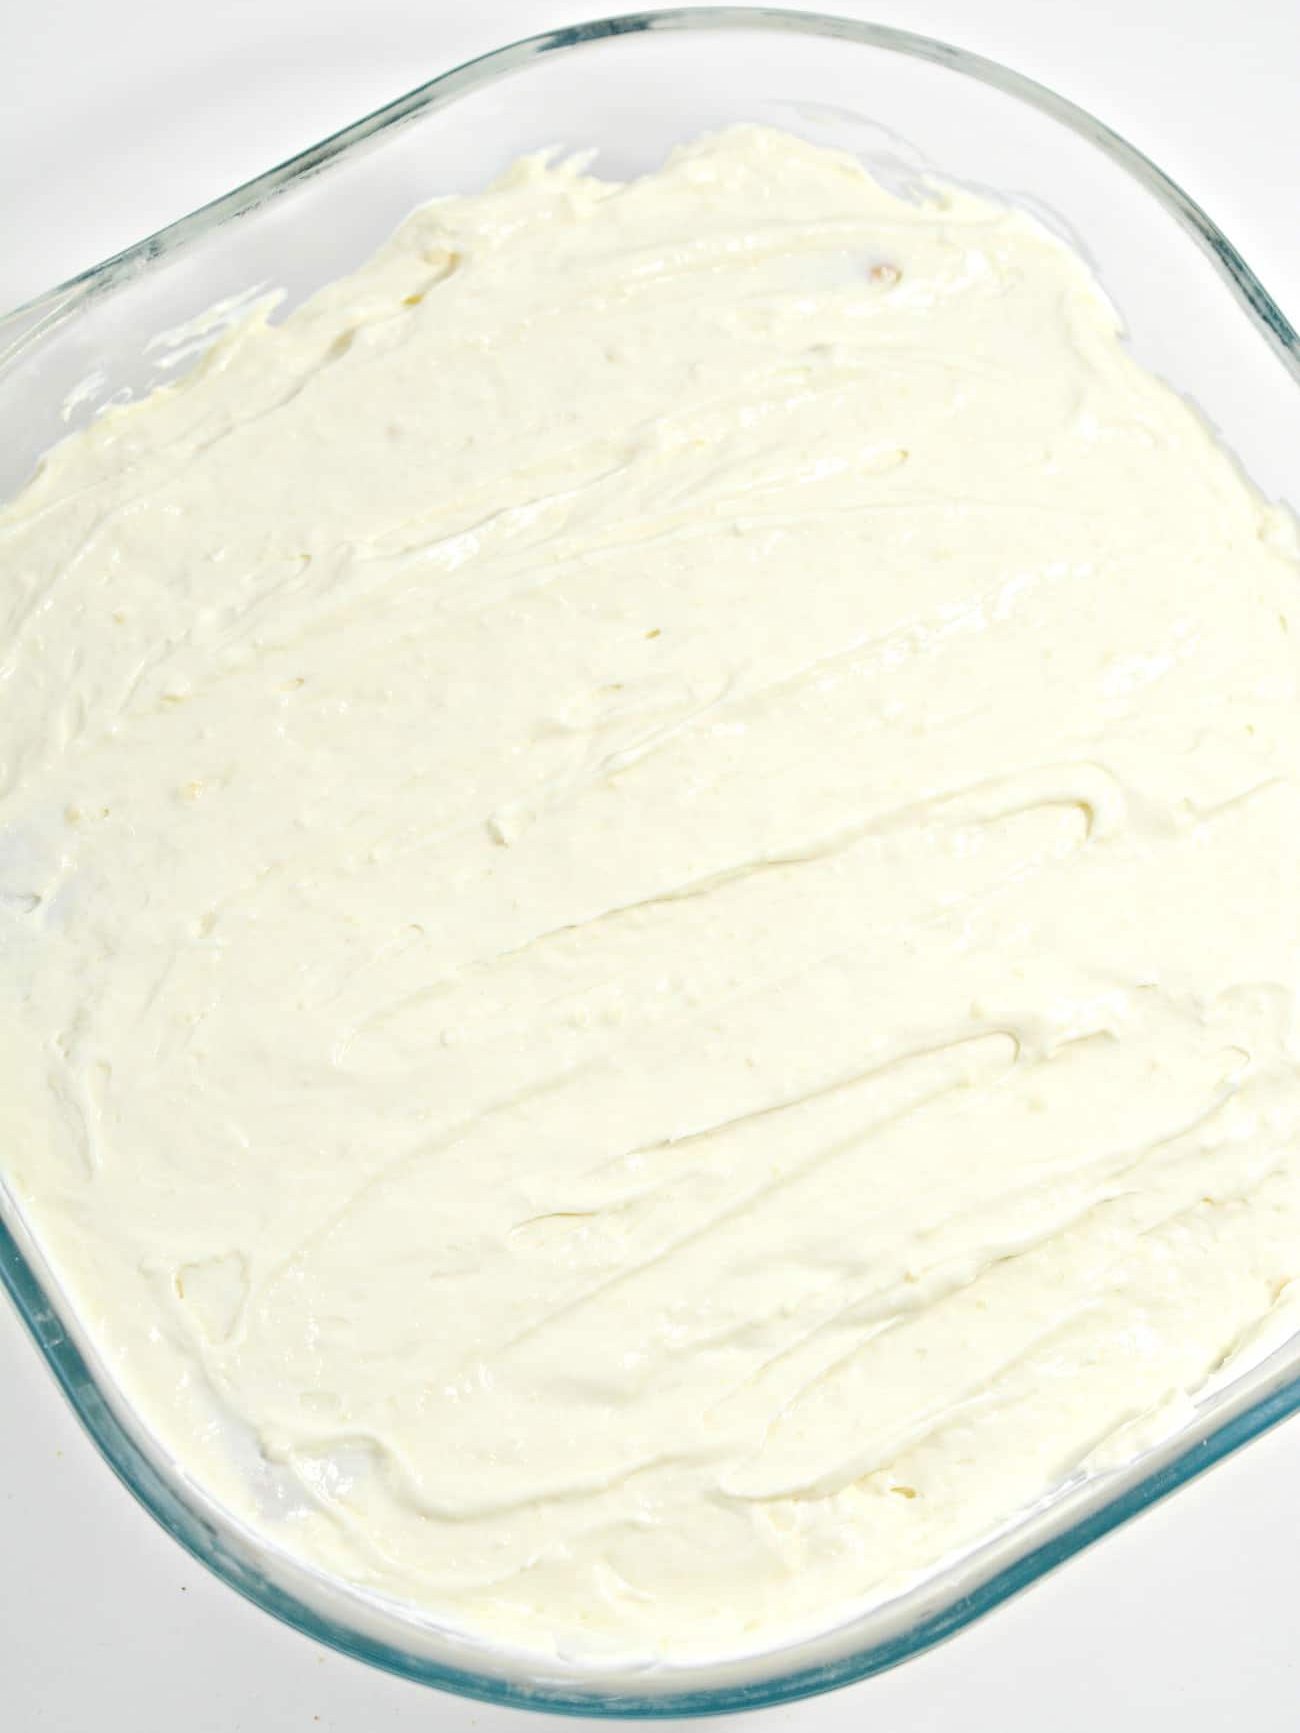 Spread the remaining cream cheese mixture over the graham crackers.